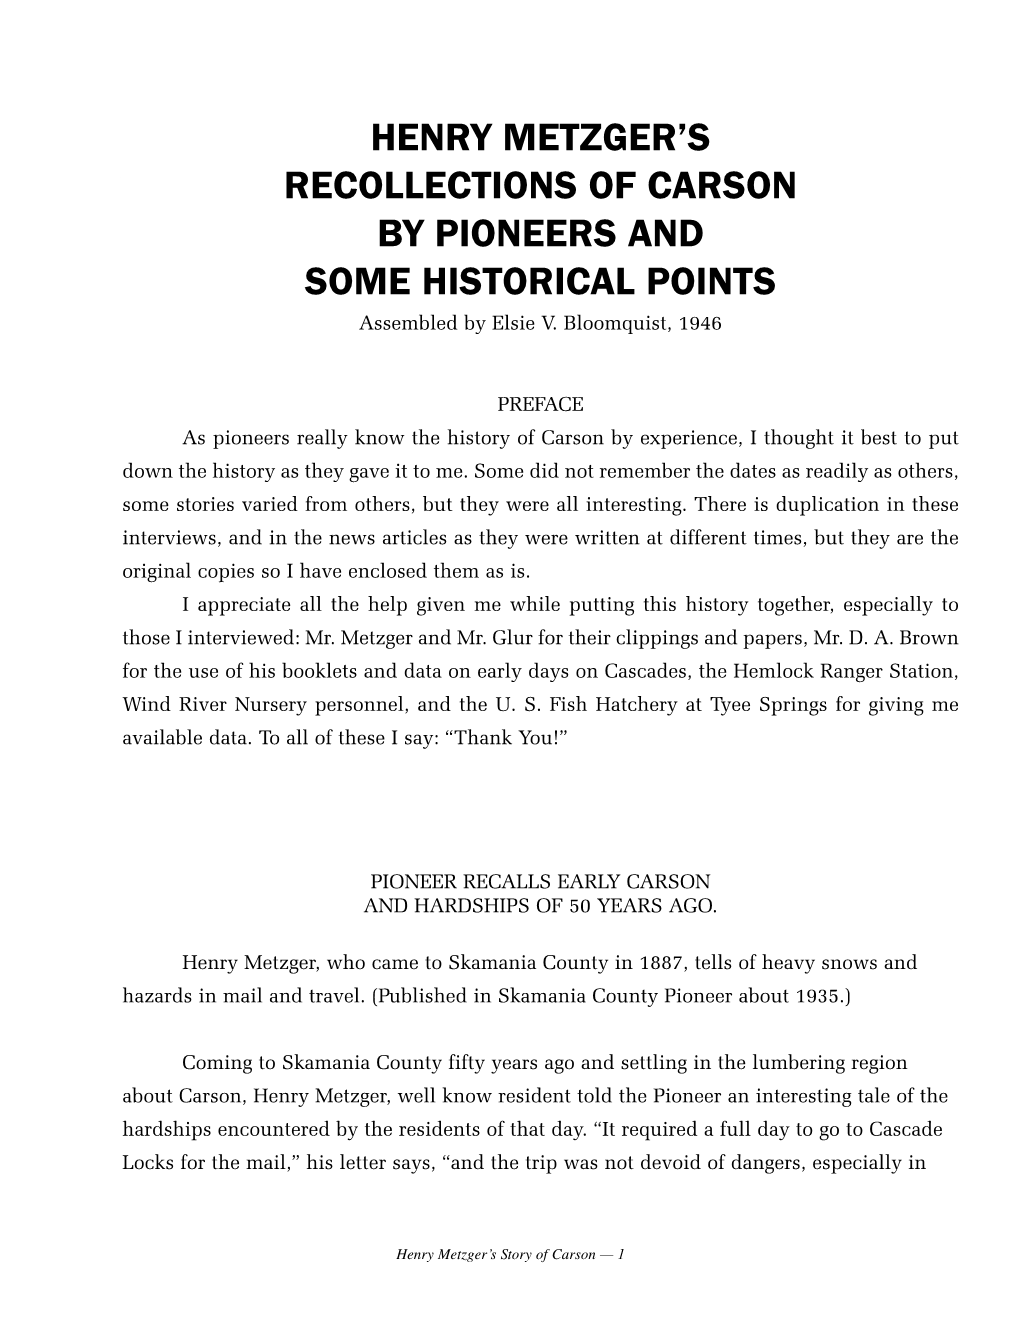 HENRY METZGER’S RECOLLECTIONS of CARSON by PIONEERS and SOME HISTORICAL POINTS Assembled by Elsie V